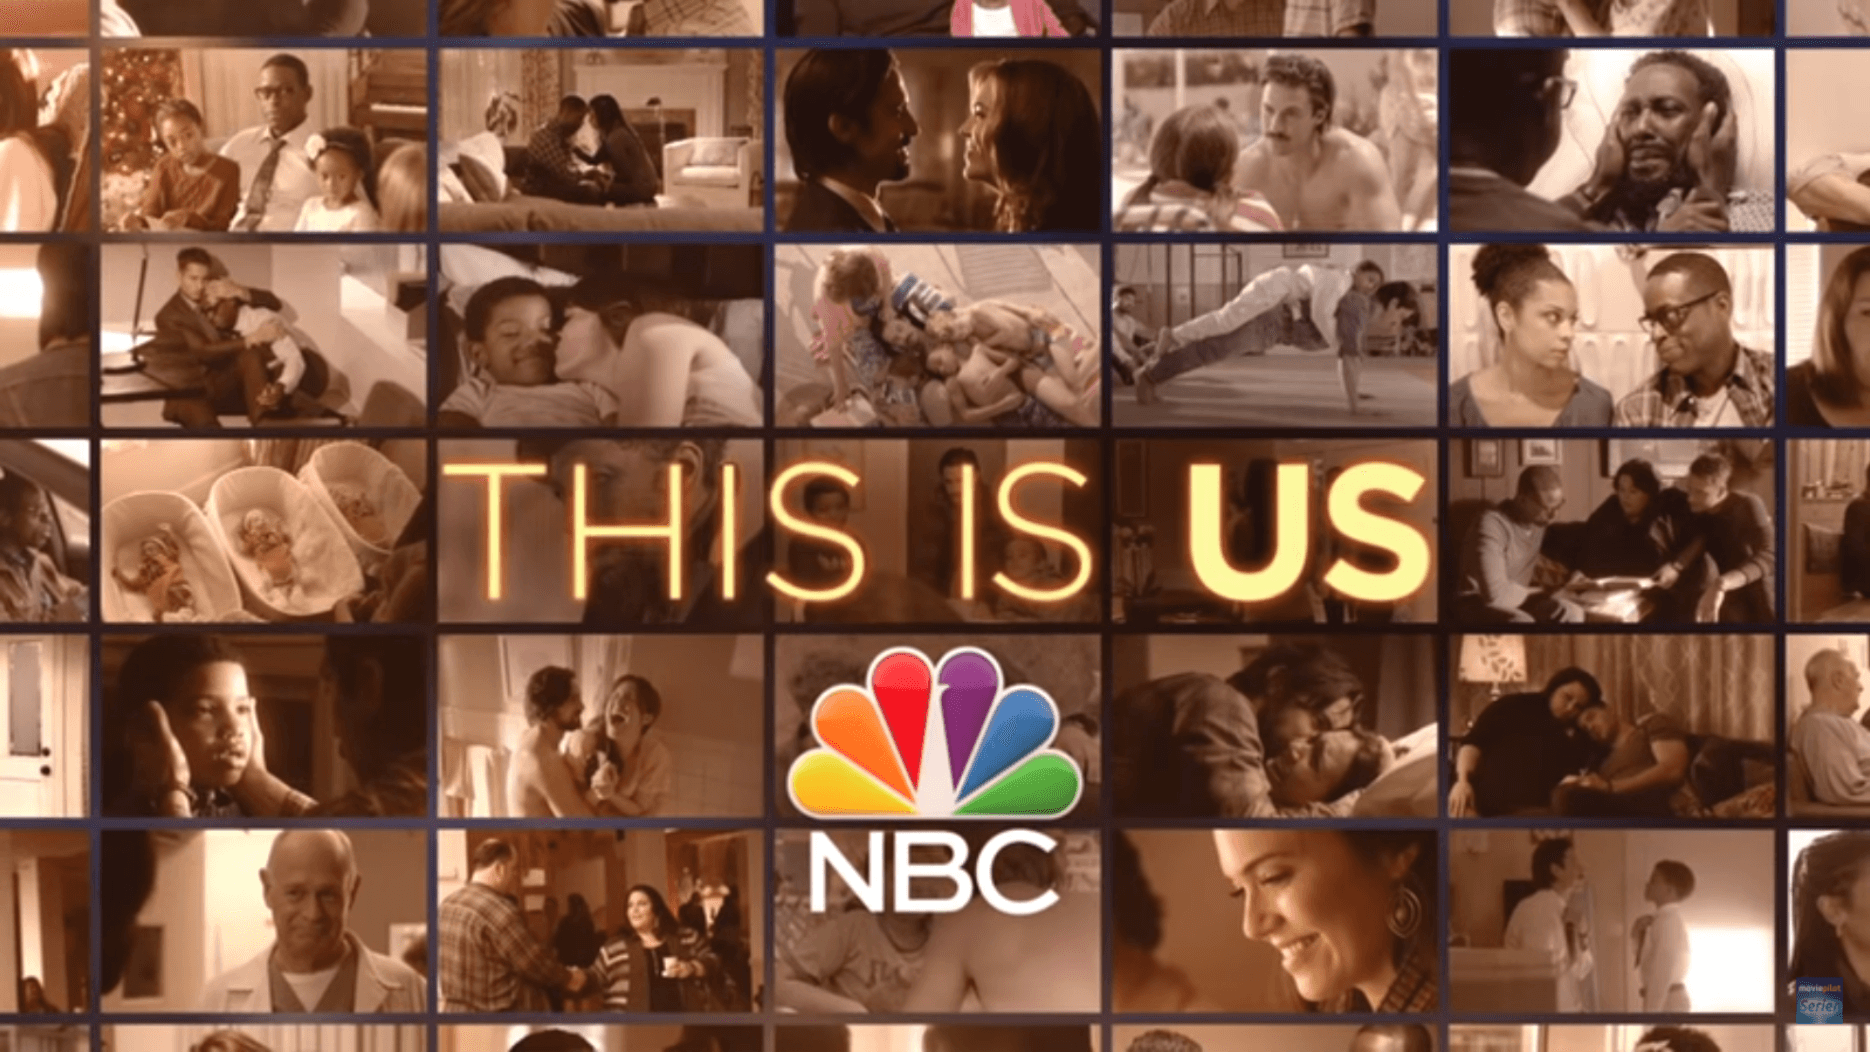 Identifying Healthy Relationship Behaviors in “This is Us”